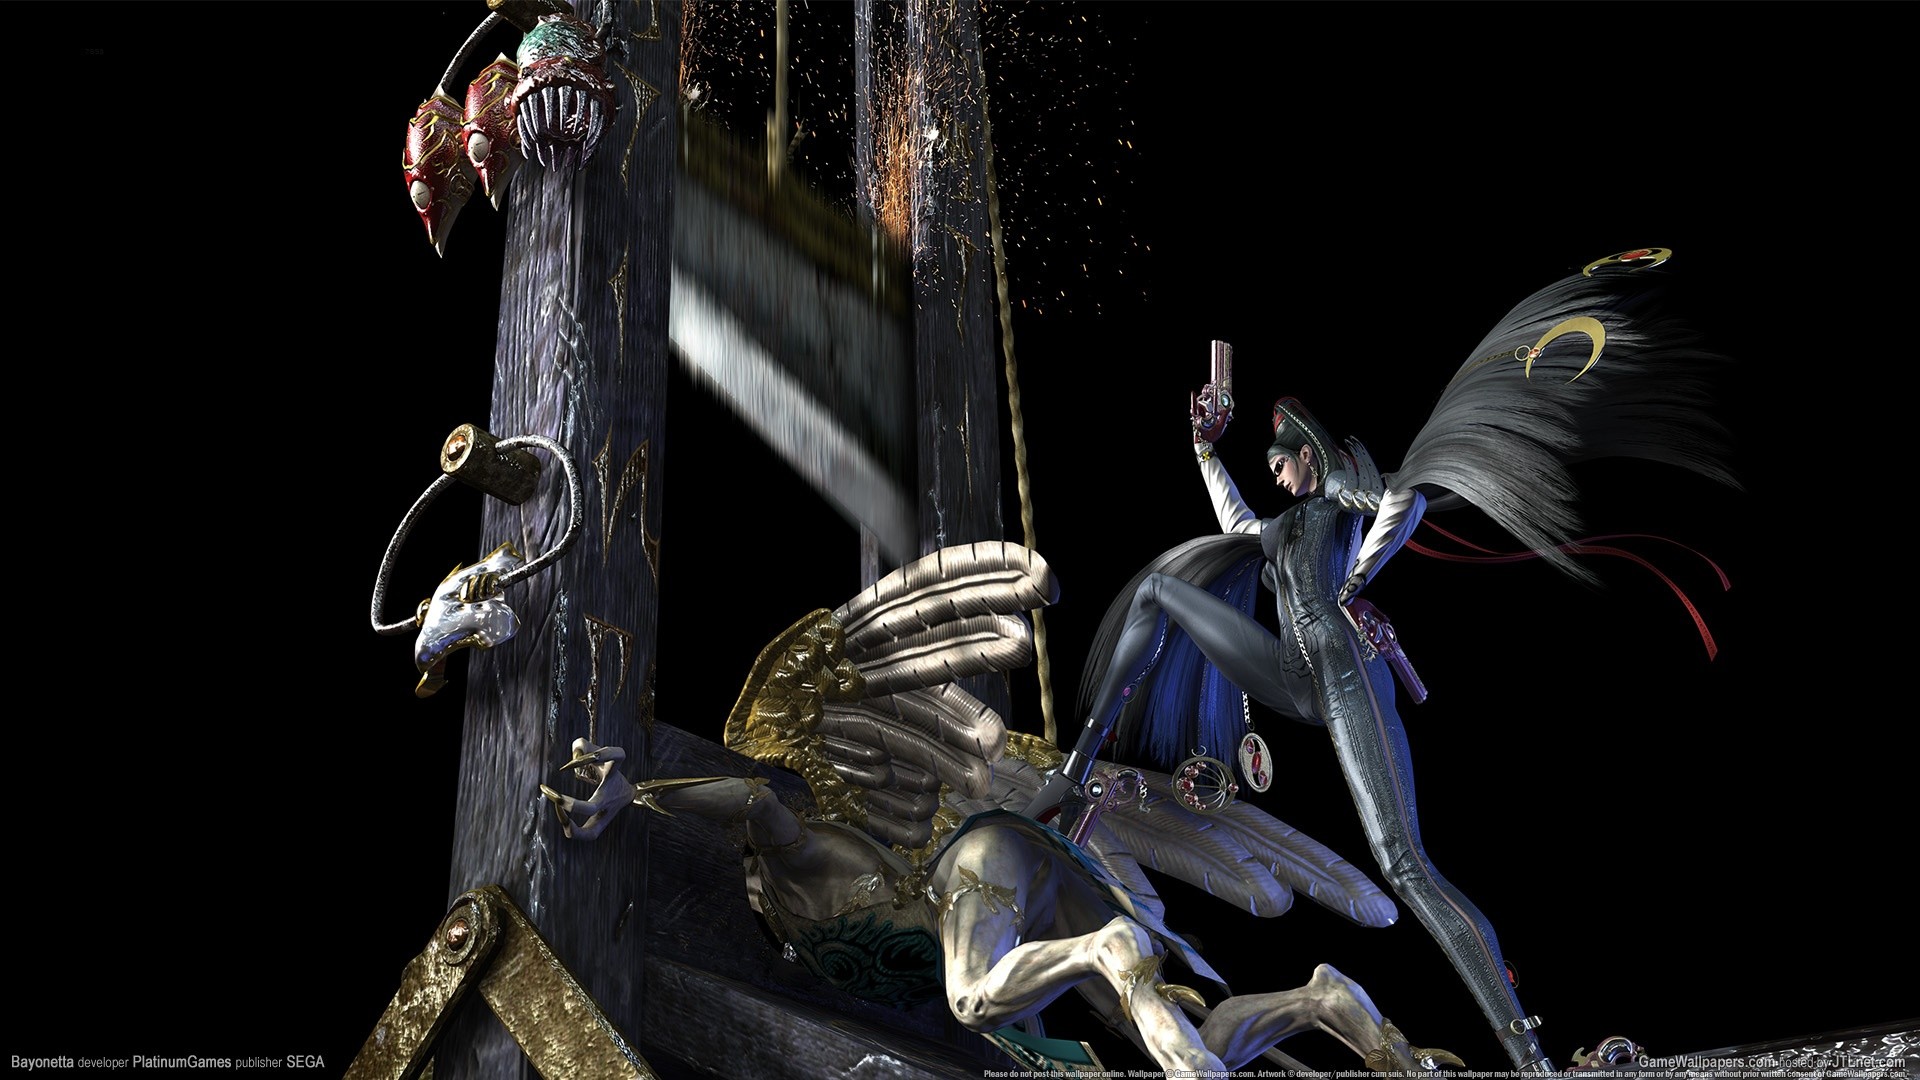 1920x1080 Bayonetta Wallpapers, Pictures, Images